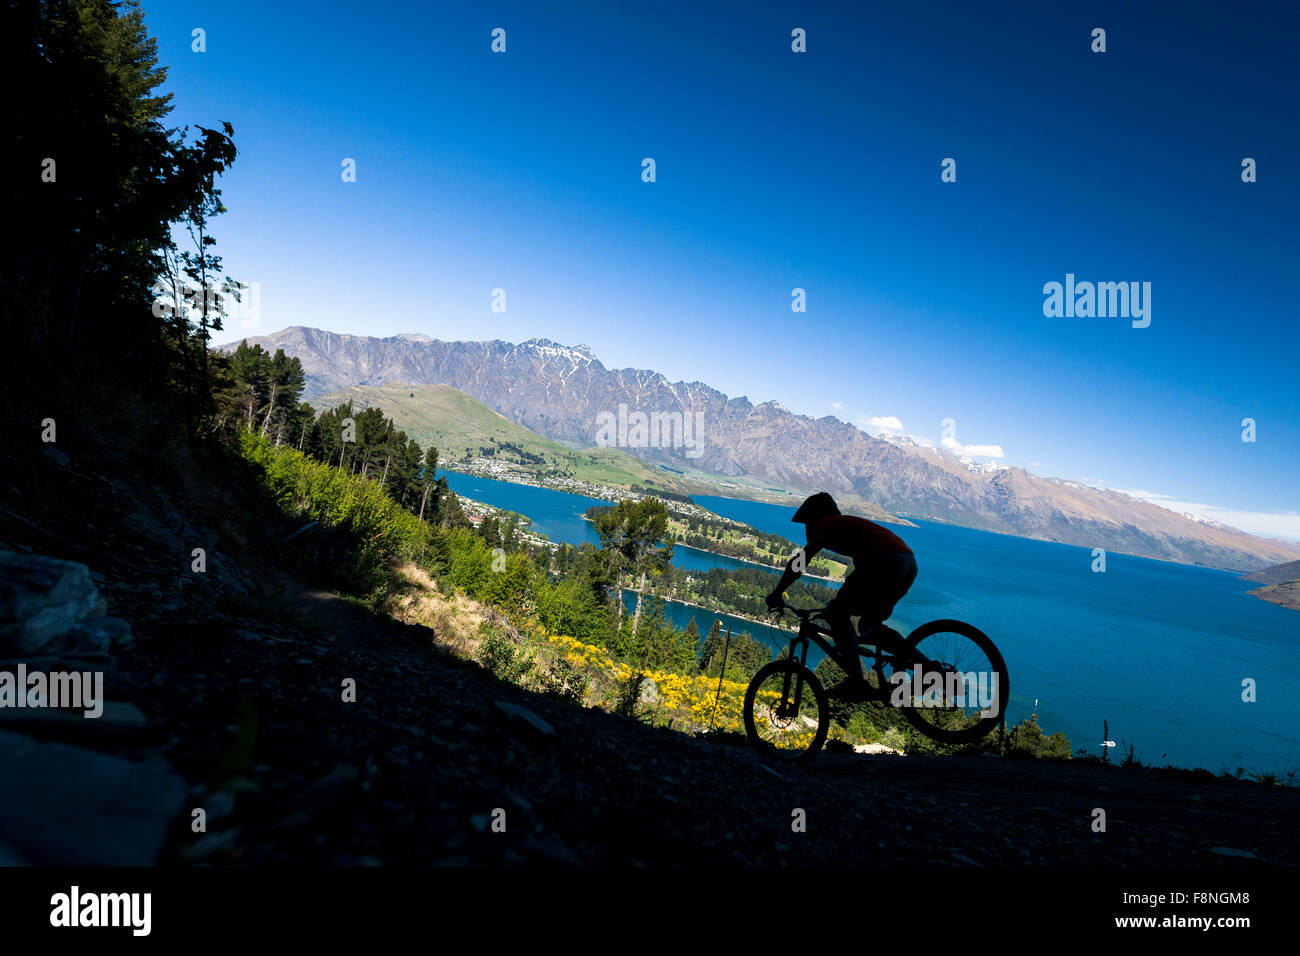 Silhouette of mountain bike rider in Queenstown, New Zealand Stock Photo